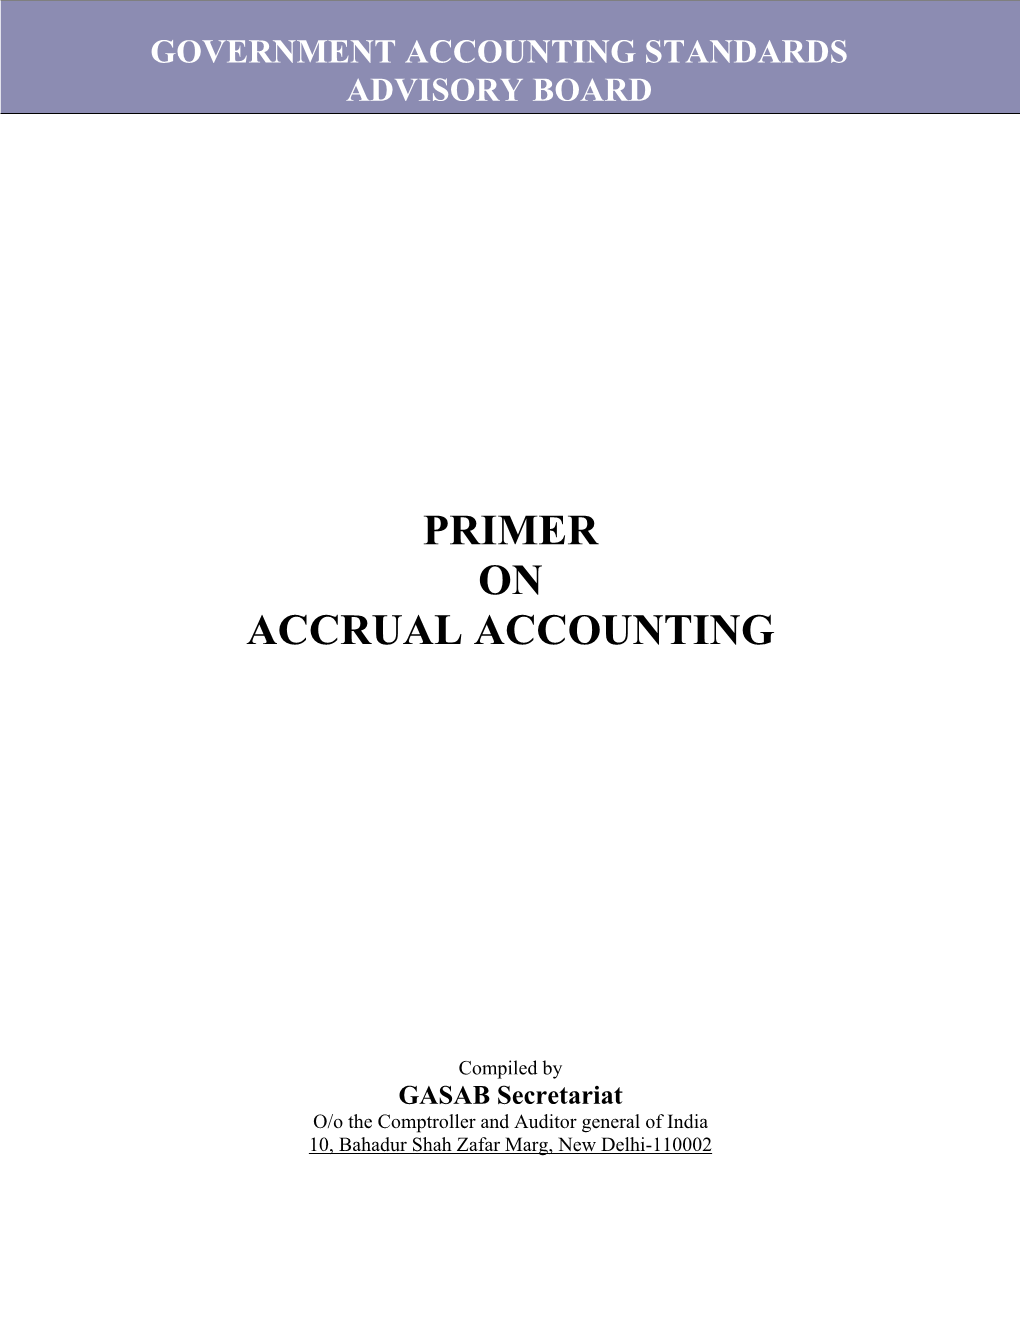 Primer on Accrual Accounting